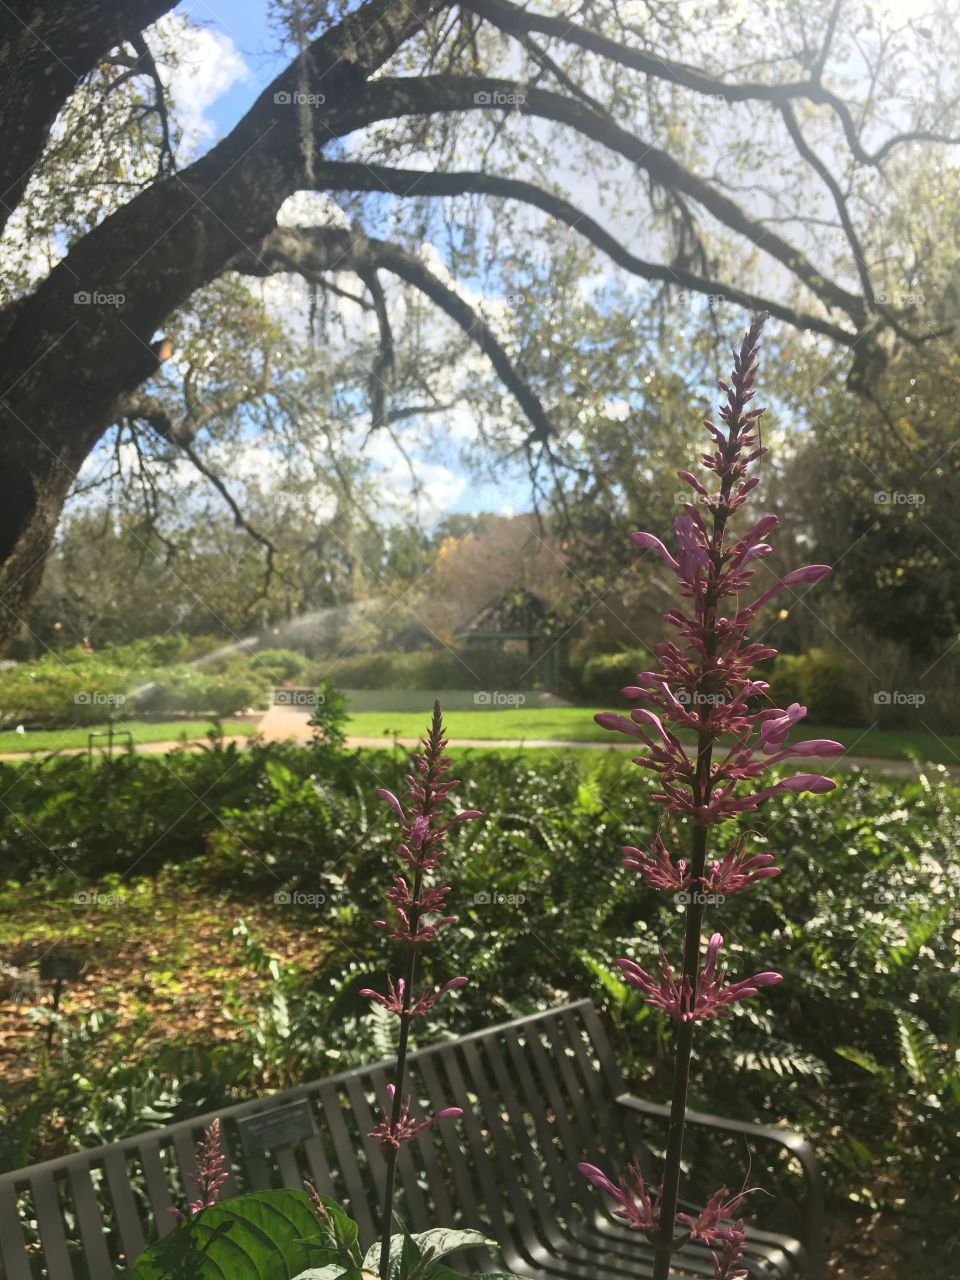 Pink flowers bloom in the foreground of a large manicured garden under an old live oak tree